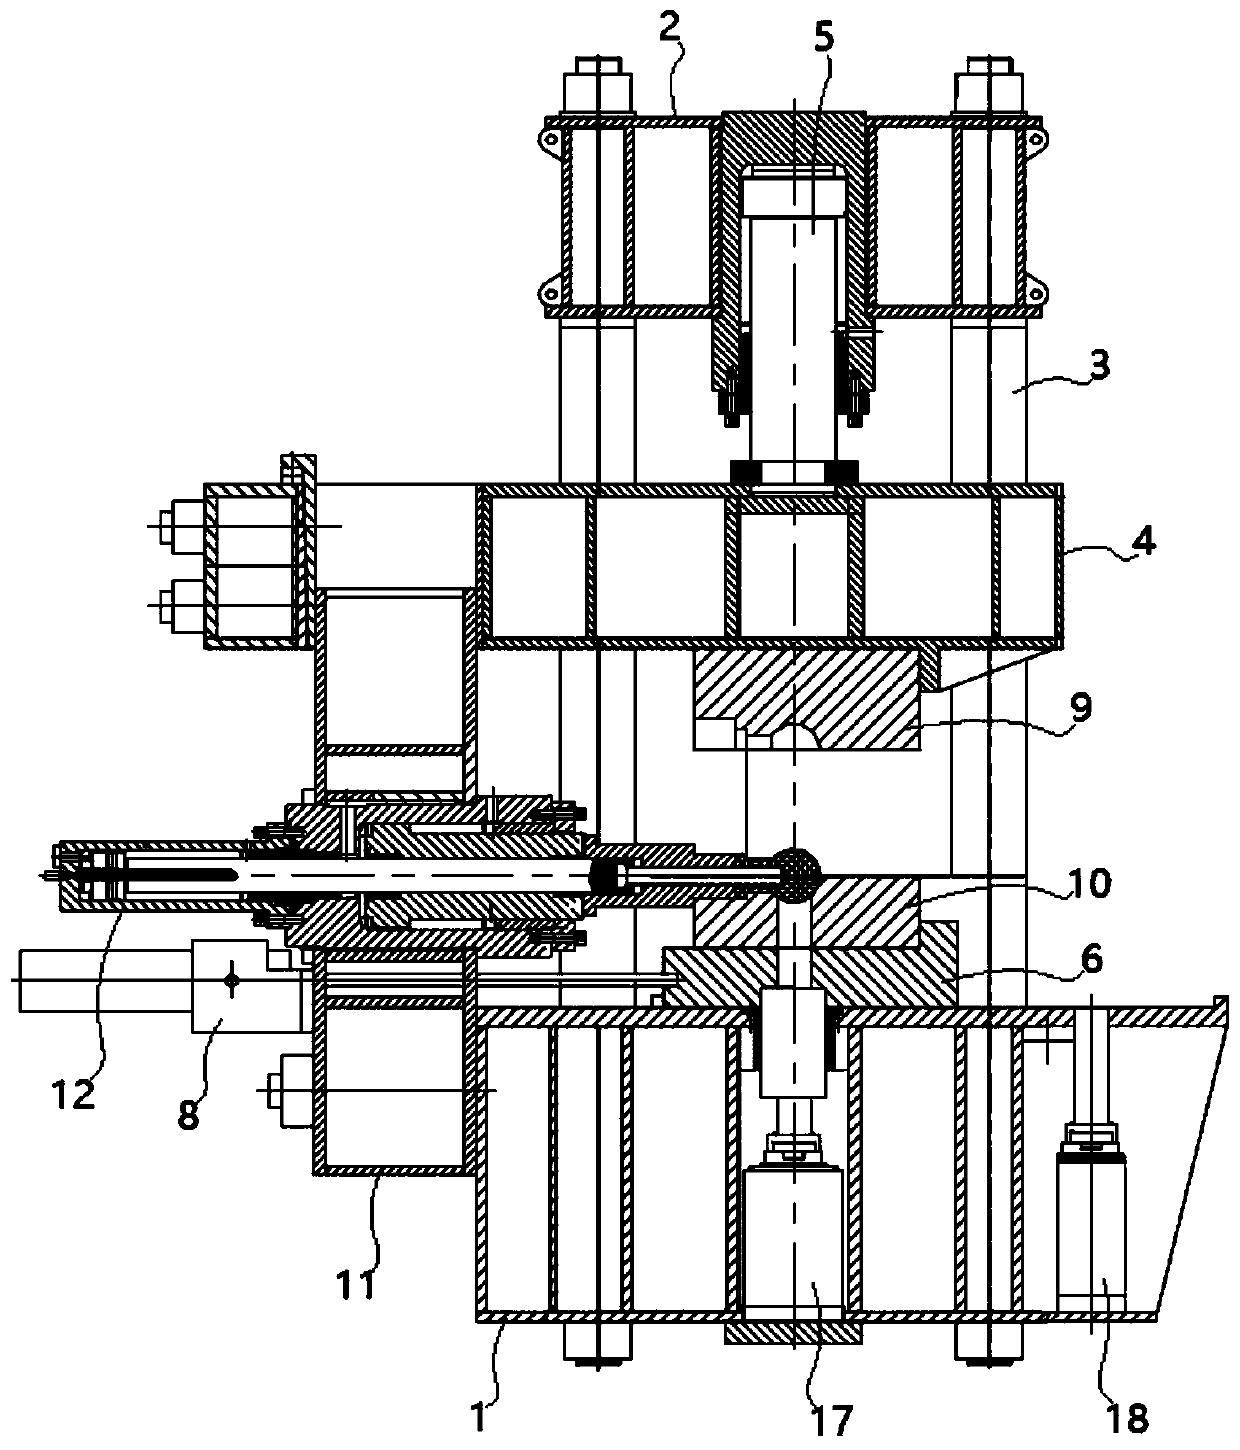 Multidirectional die-forging hydraulic press of novel structure